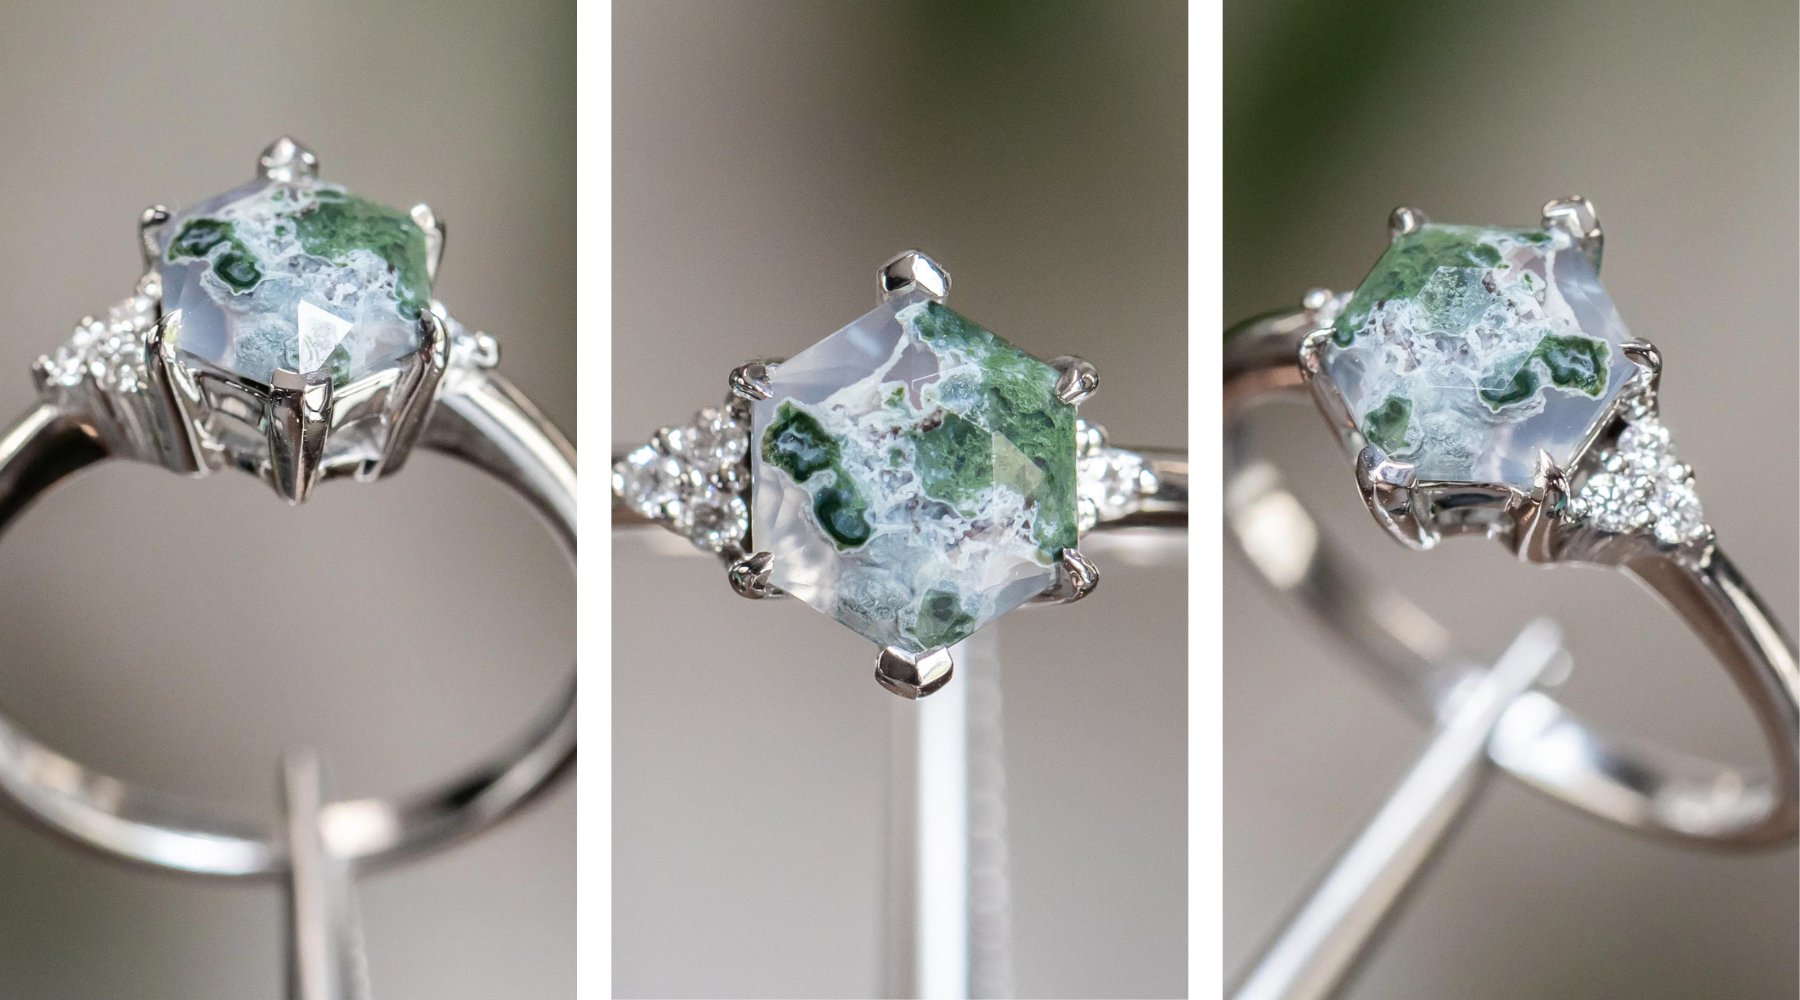 HEXAGON MOSS AGATE RINGS WITH DIAMOND SIDE STONES IN 14K WHITE GOLD